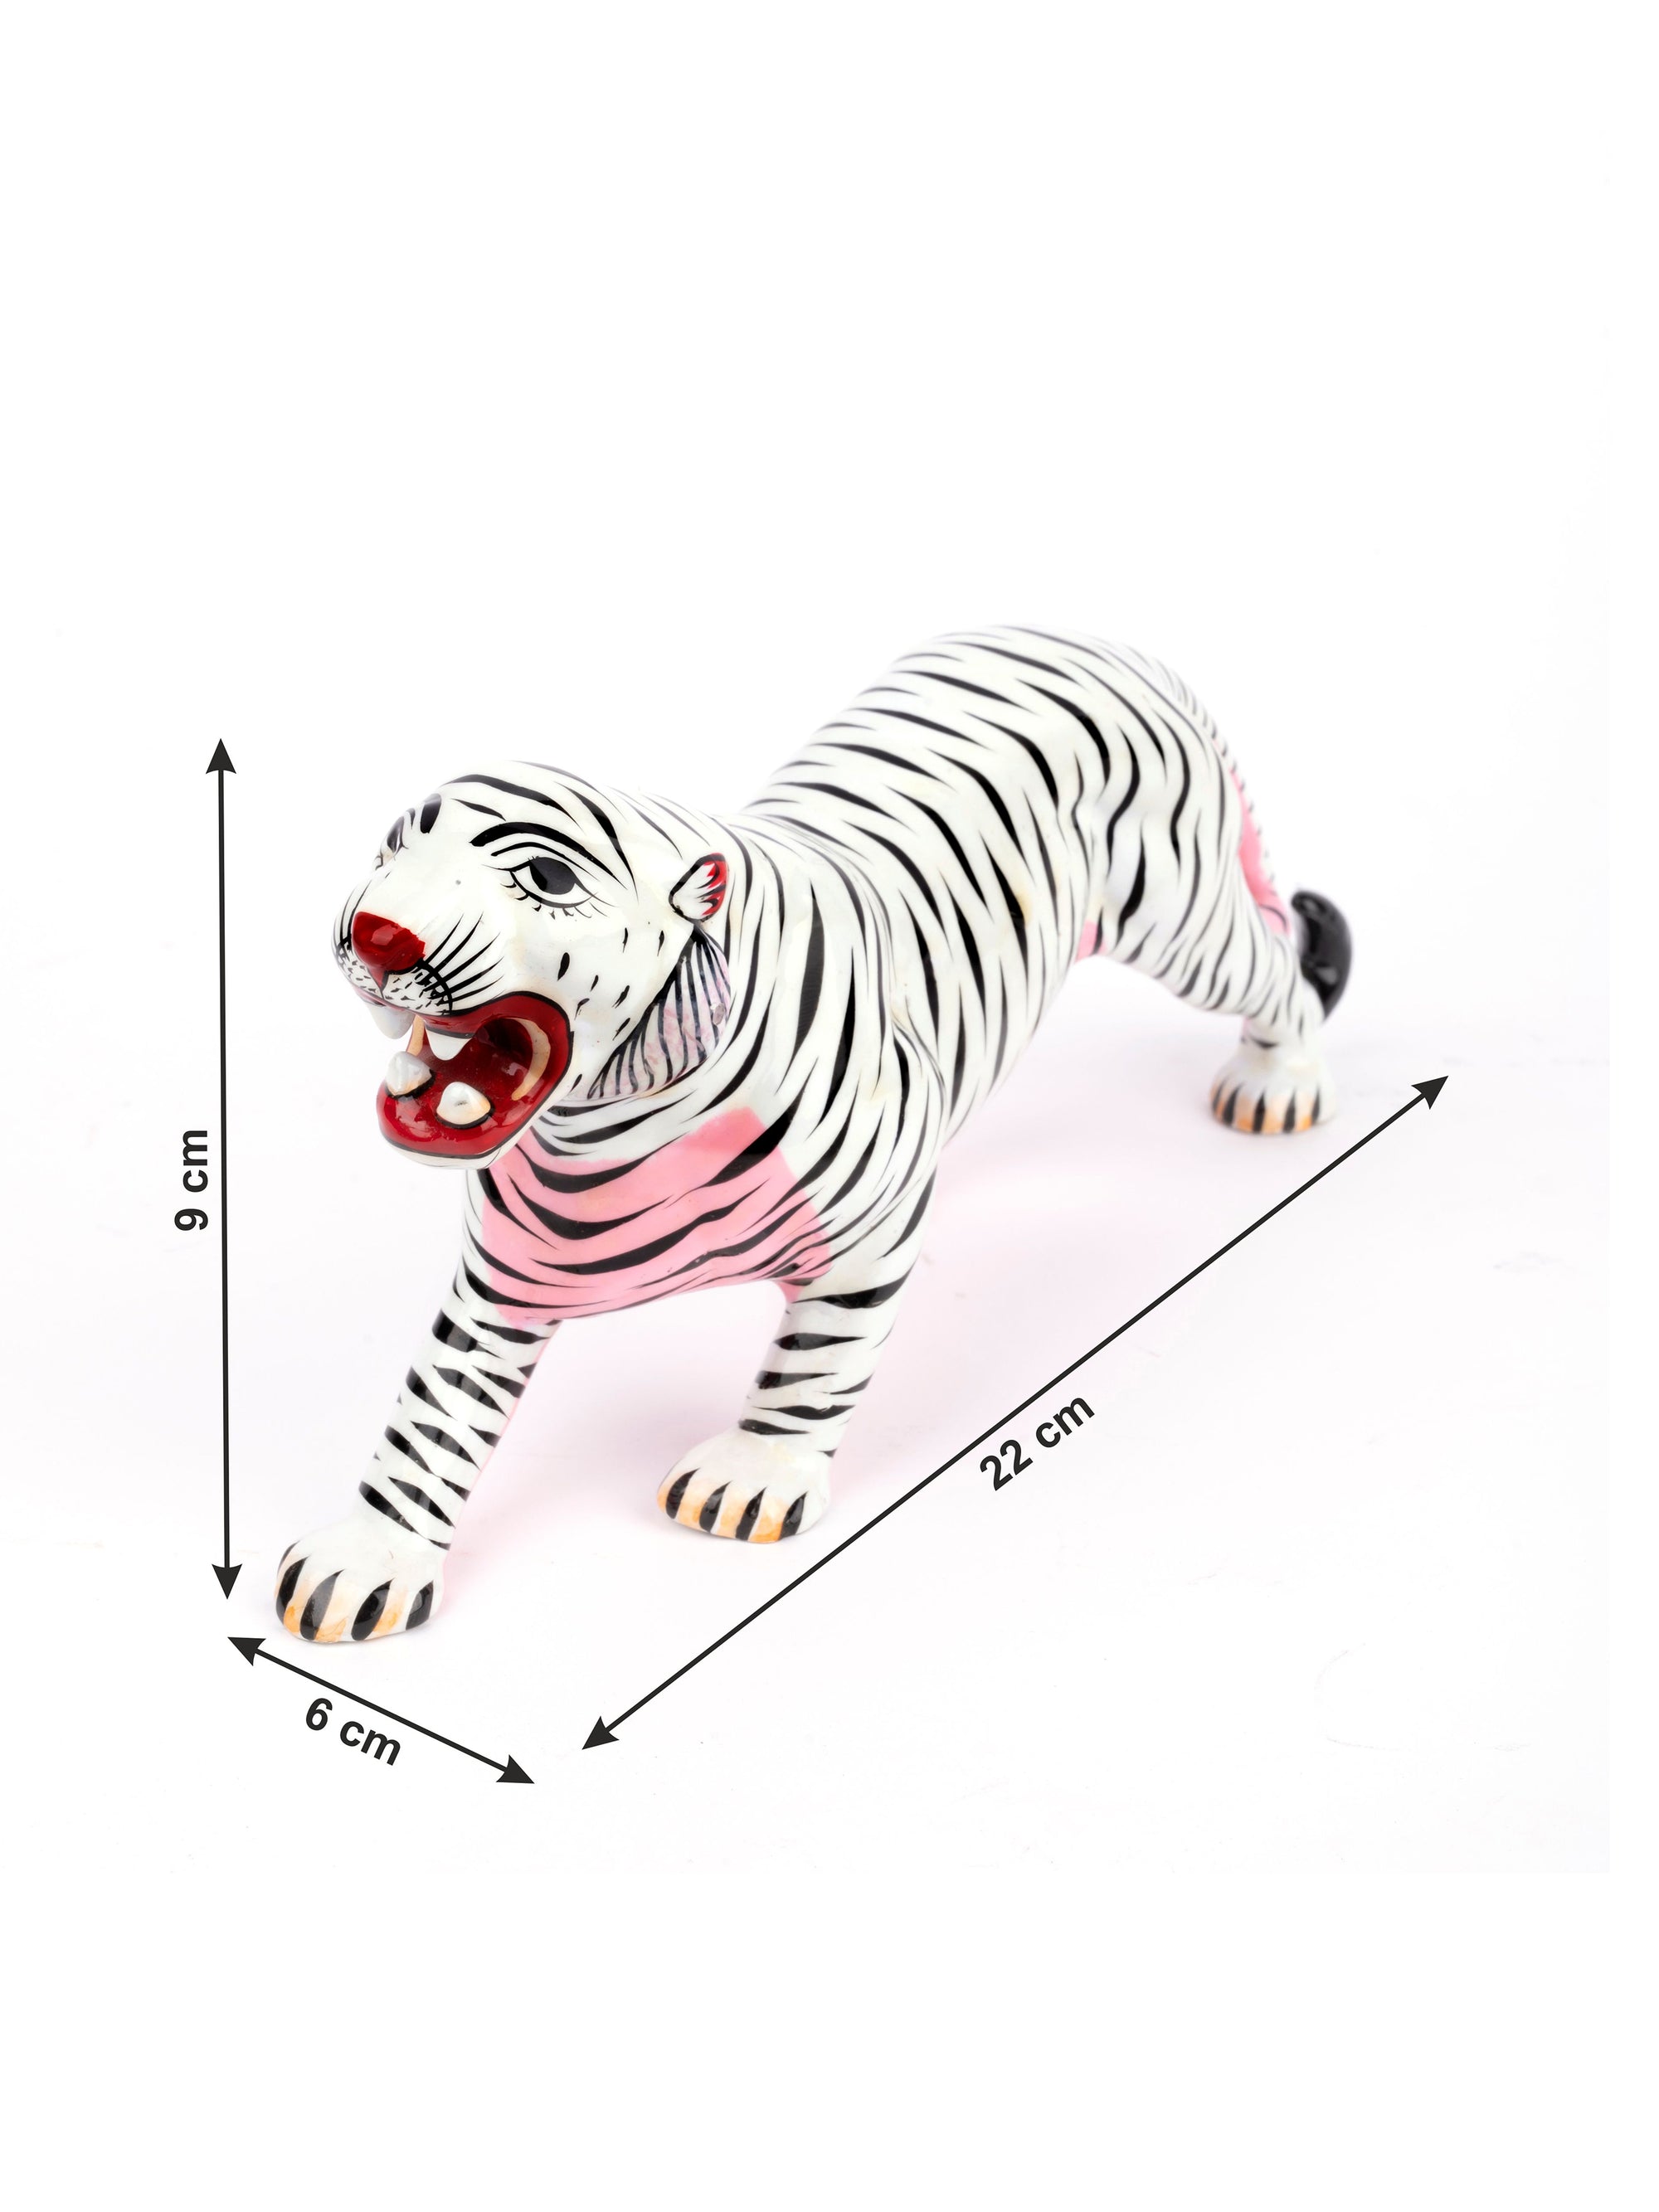 White Metal Tiger Figurine for Home Office Decor, 9 inches long - The Heritage Artifacts